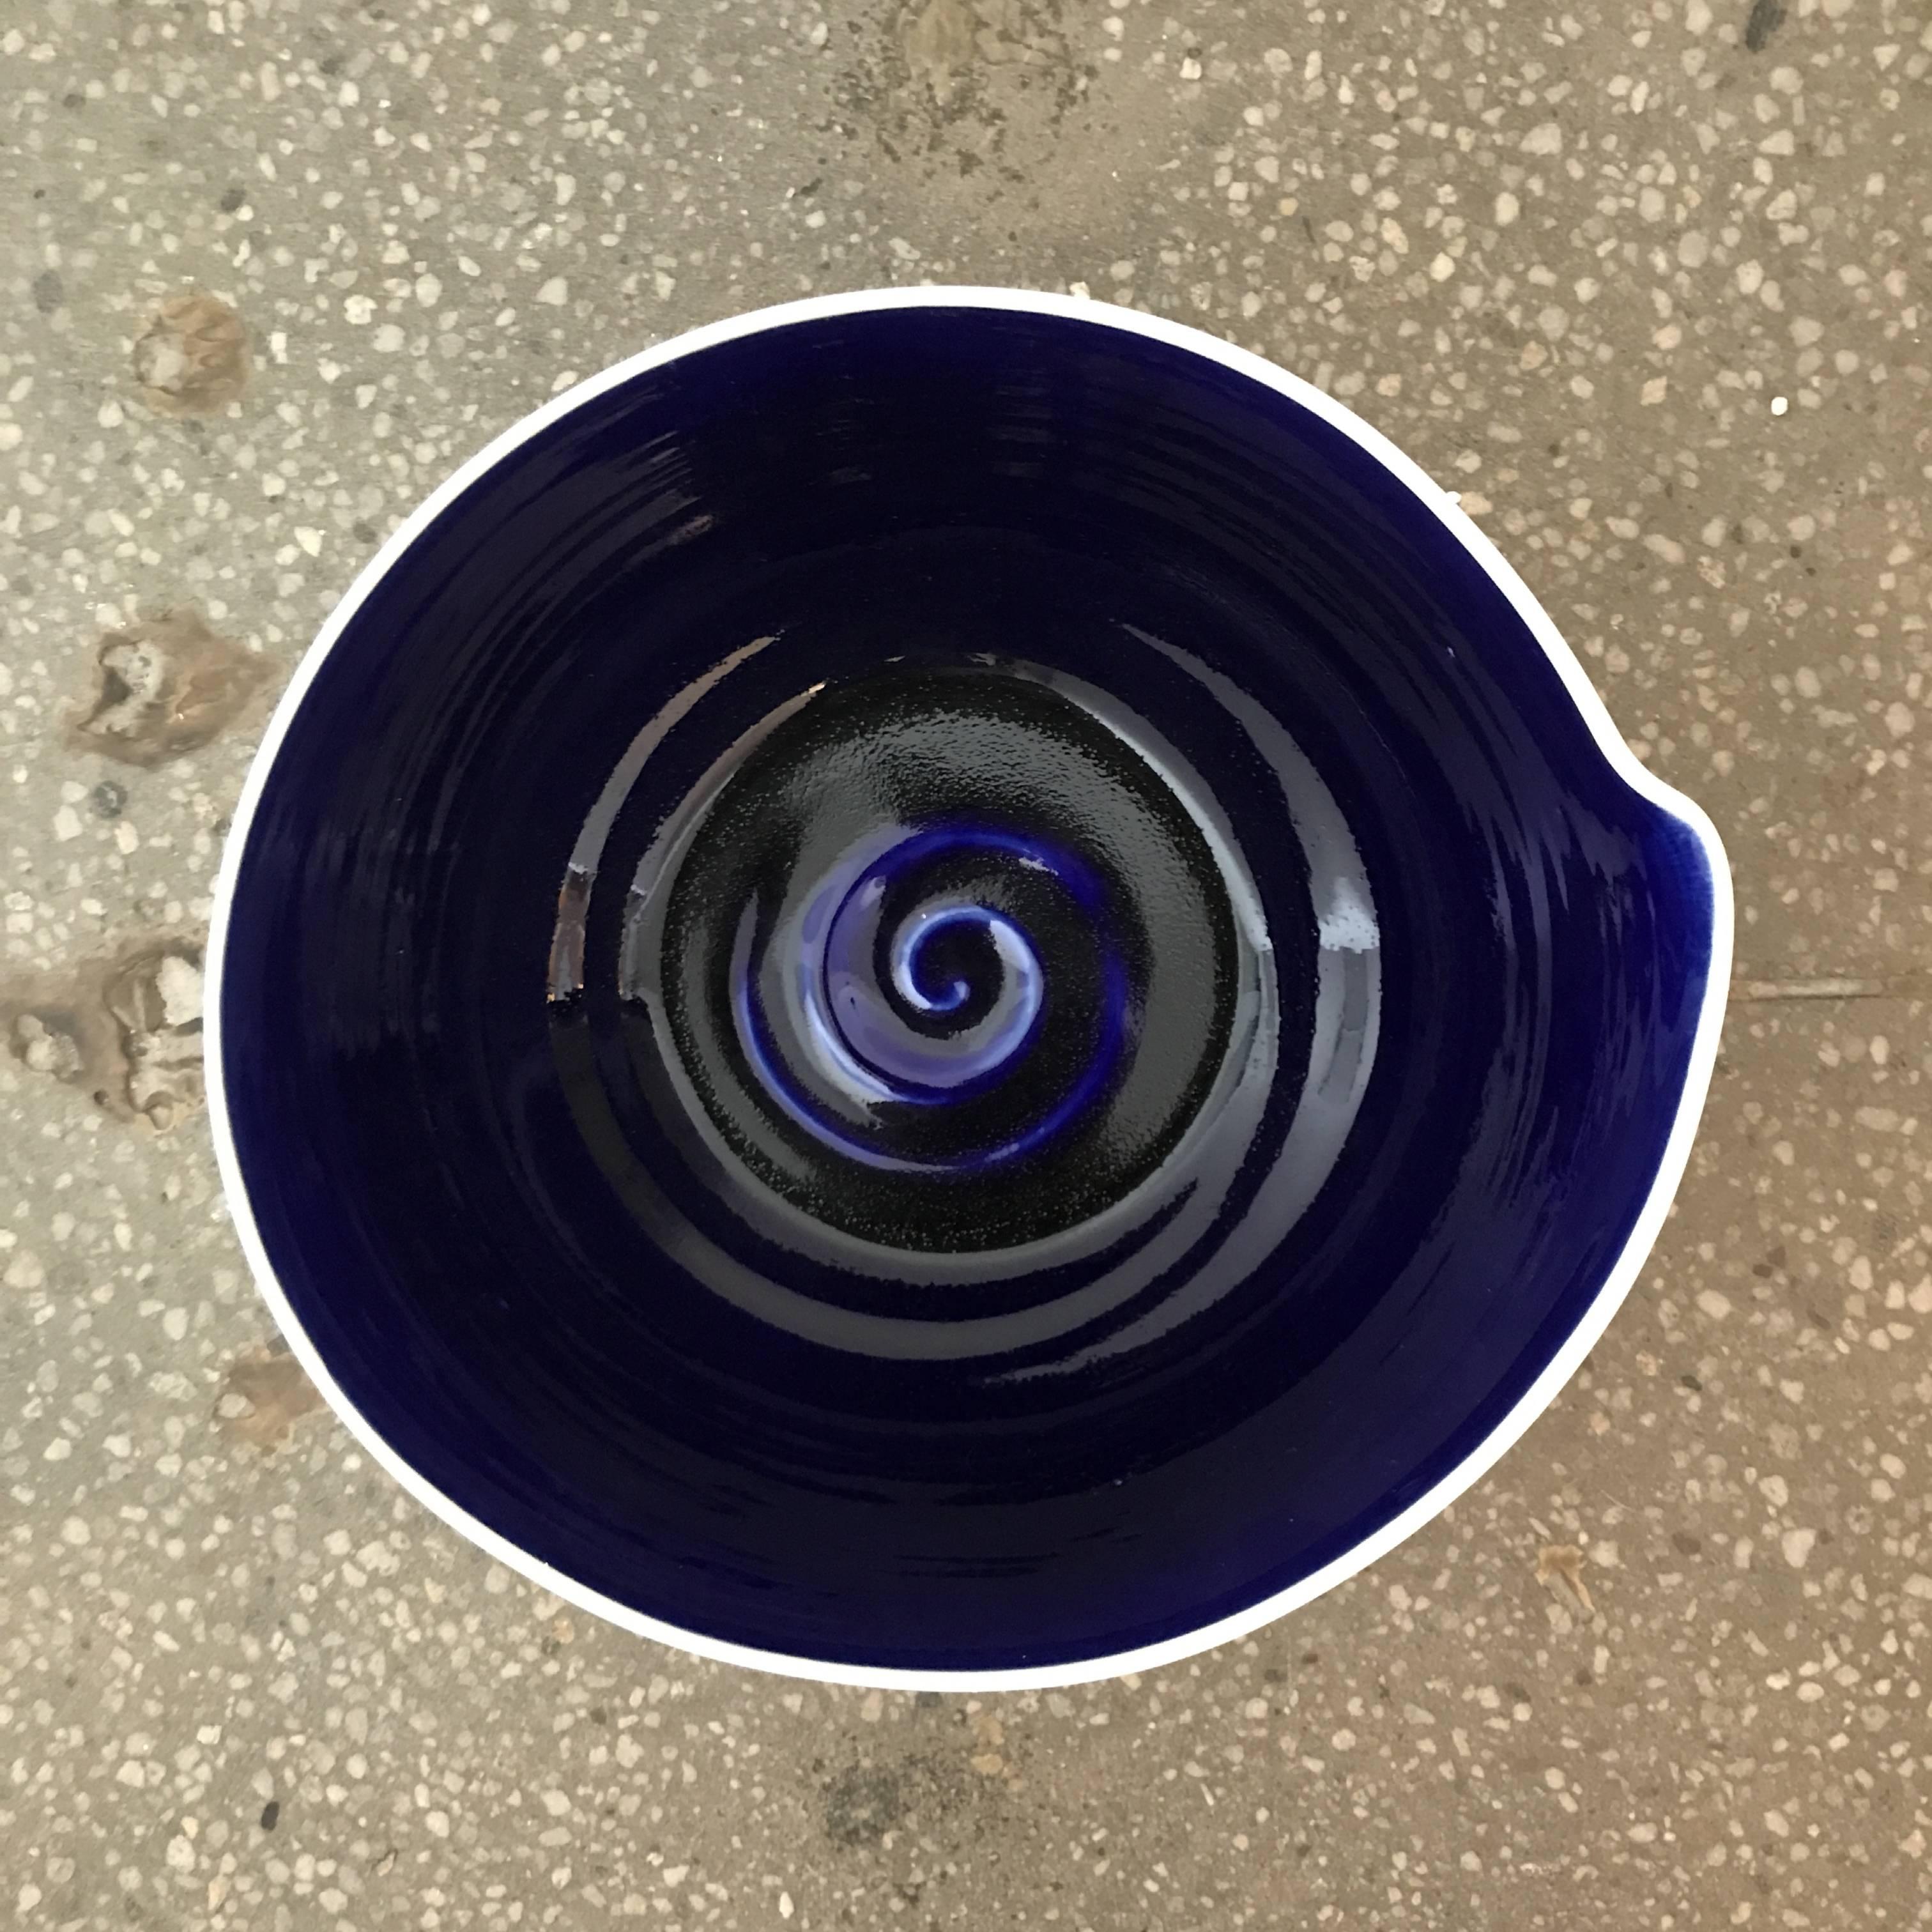 Hand-thrown blue and white ceramic studio pottery bowls created by a local artisan in Jaffa Israel. 
Indigo blue interior with white exterior. Subtle bend detail on the rim of each bowl. Intricate graphics and artist signature on the bottom. 10